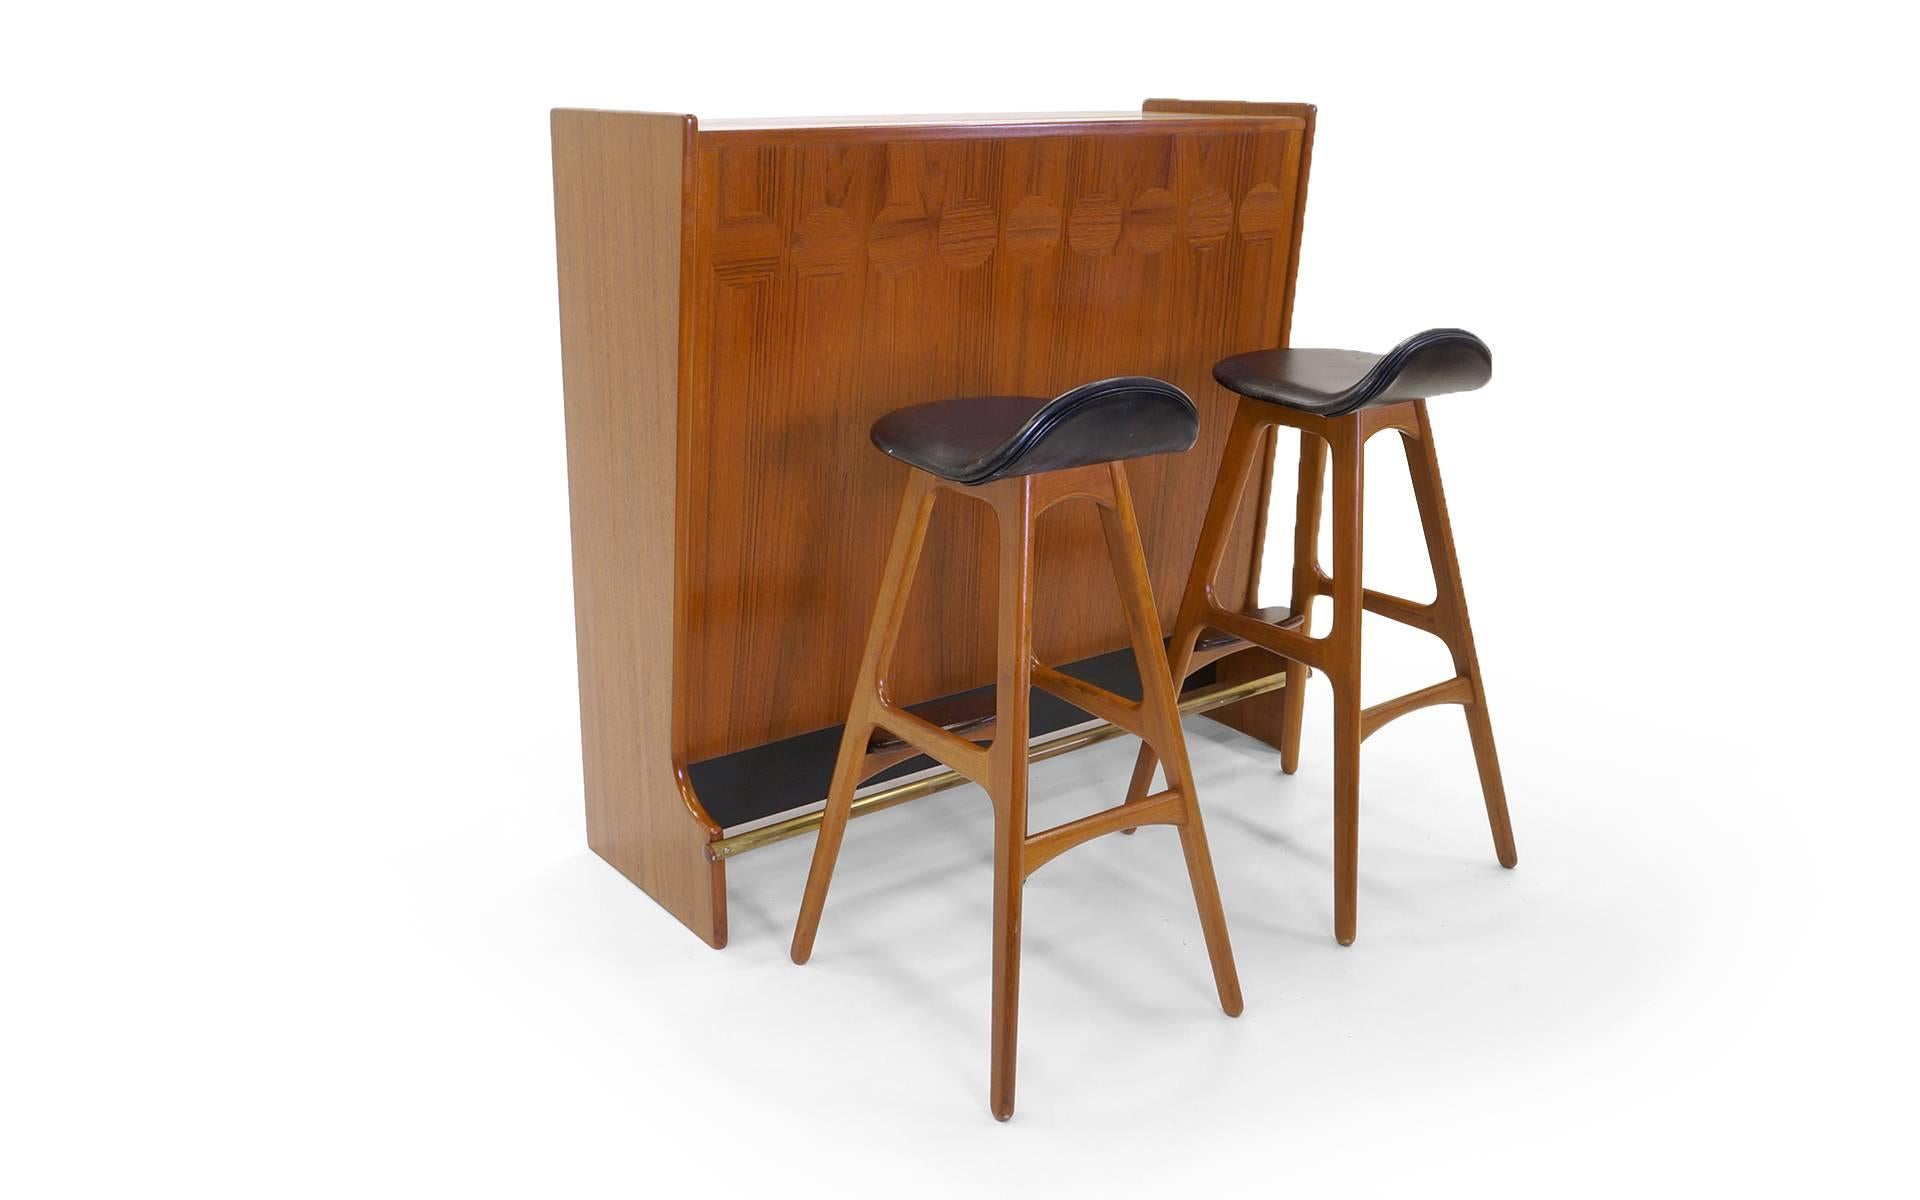 Amazing 1960s teak bar by Johannes Anderson for Skanning and Son, Denmark, with two Erik Buch bar stools with teak frames and rosewood footrests. Everything is in very good original condition. The original stool seats have some wear, but no tears or